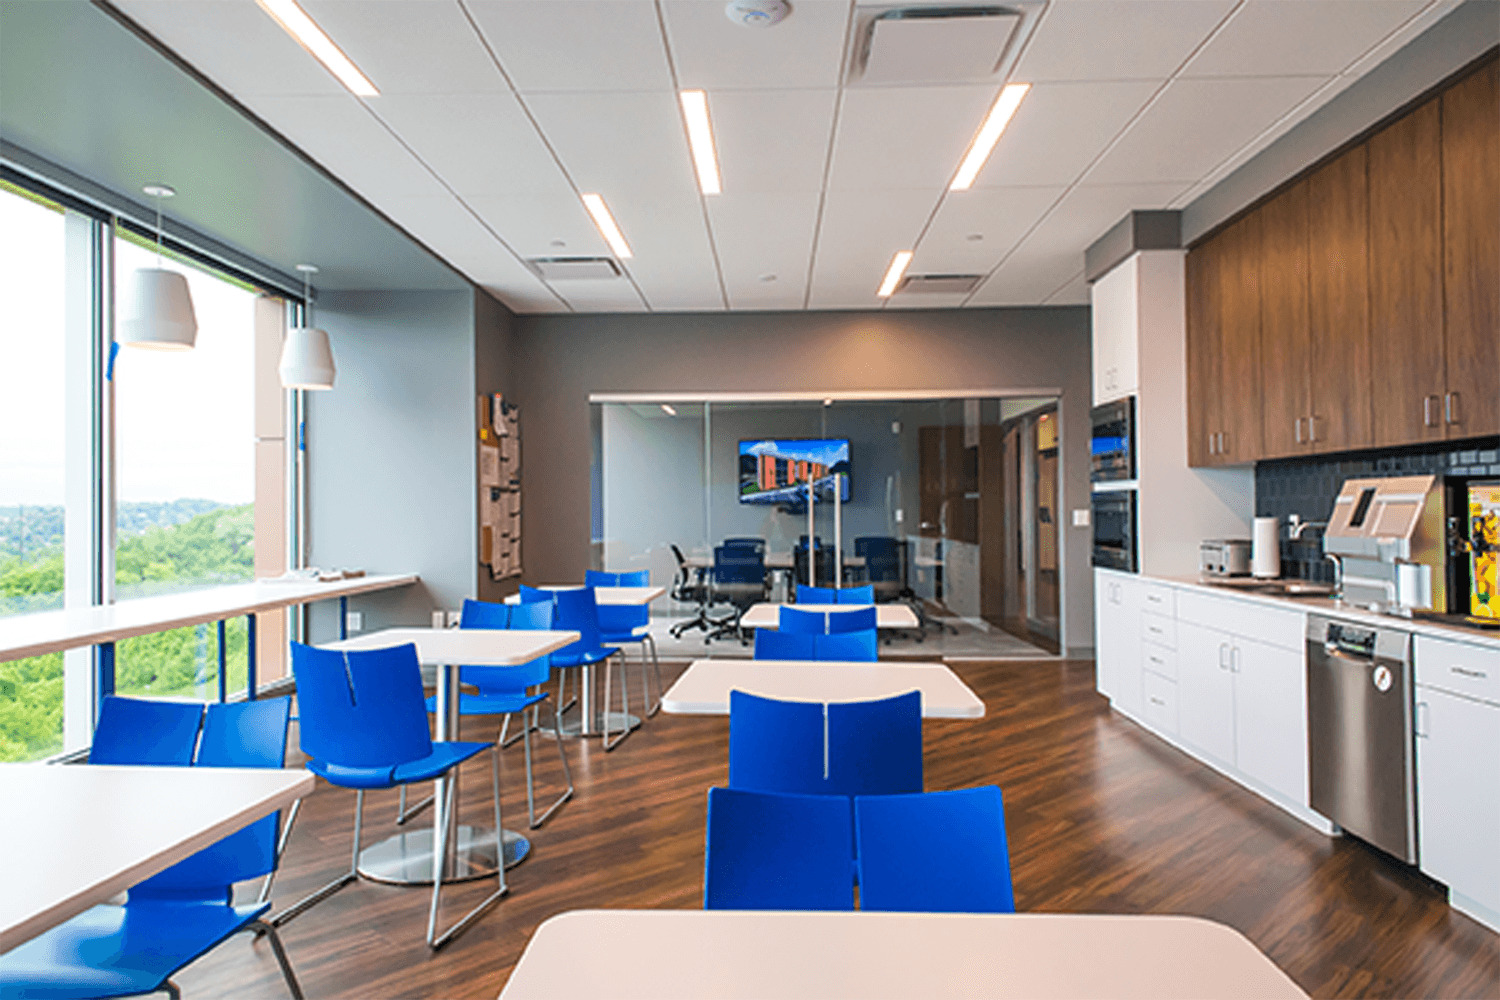 café/break area with kitchen appliances, white tables, and vibrant blue chairs